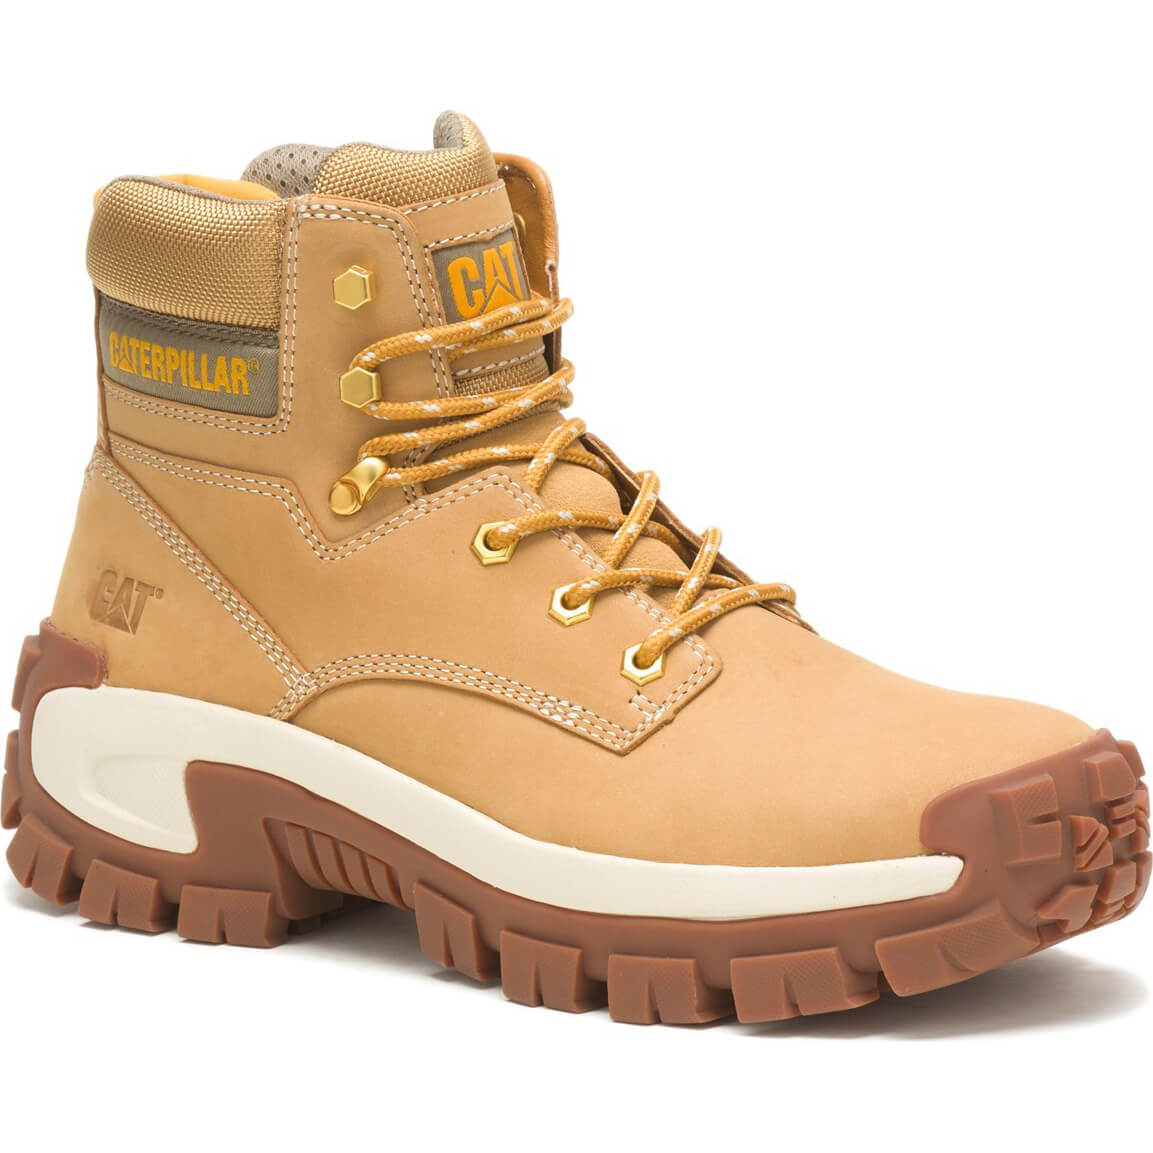 Image of Caterpillar Mens Invader Hiker Safety Boot Honey Size 6